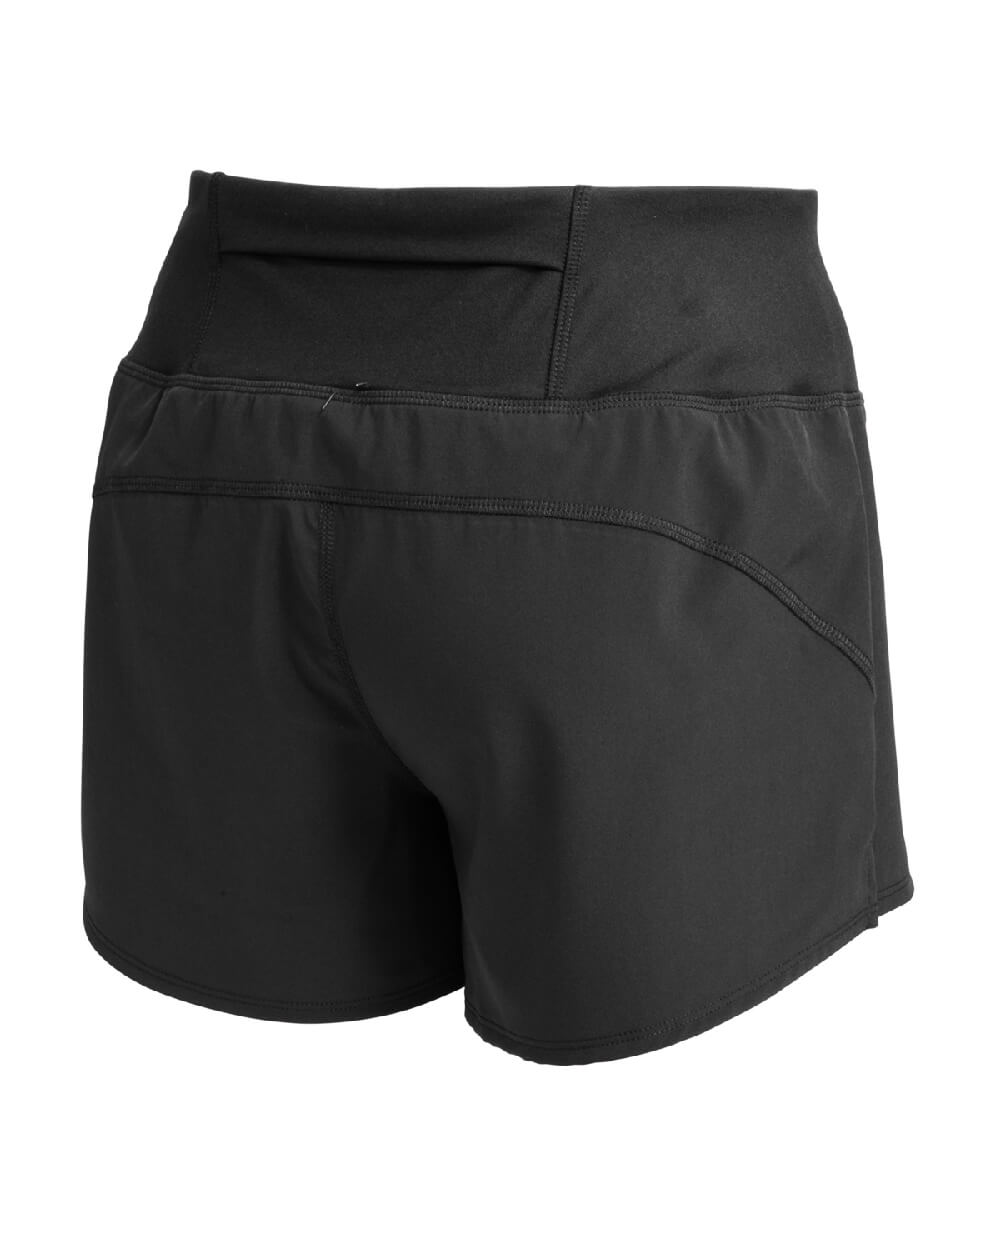 Women's Black Evolution Performance Shorts (Back) by Odisi Apparel